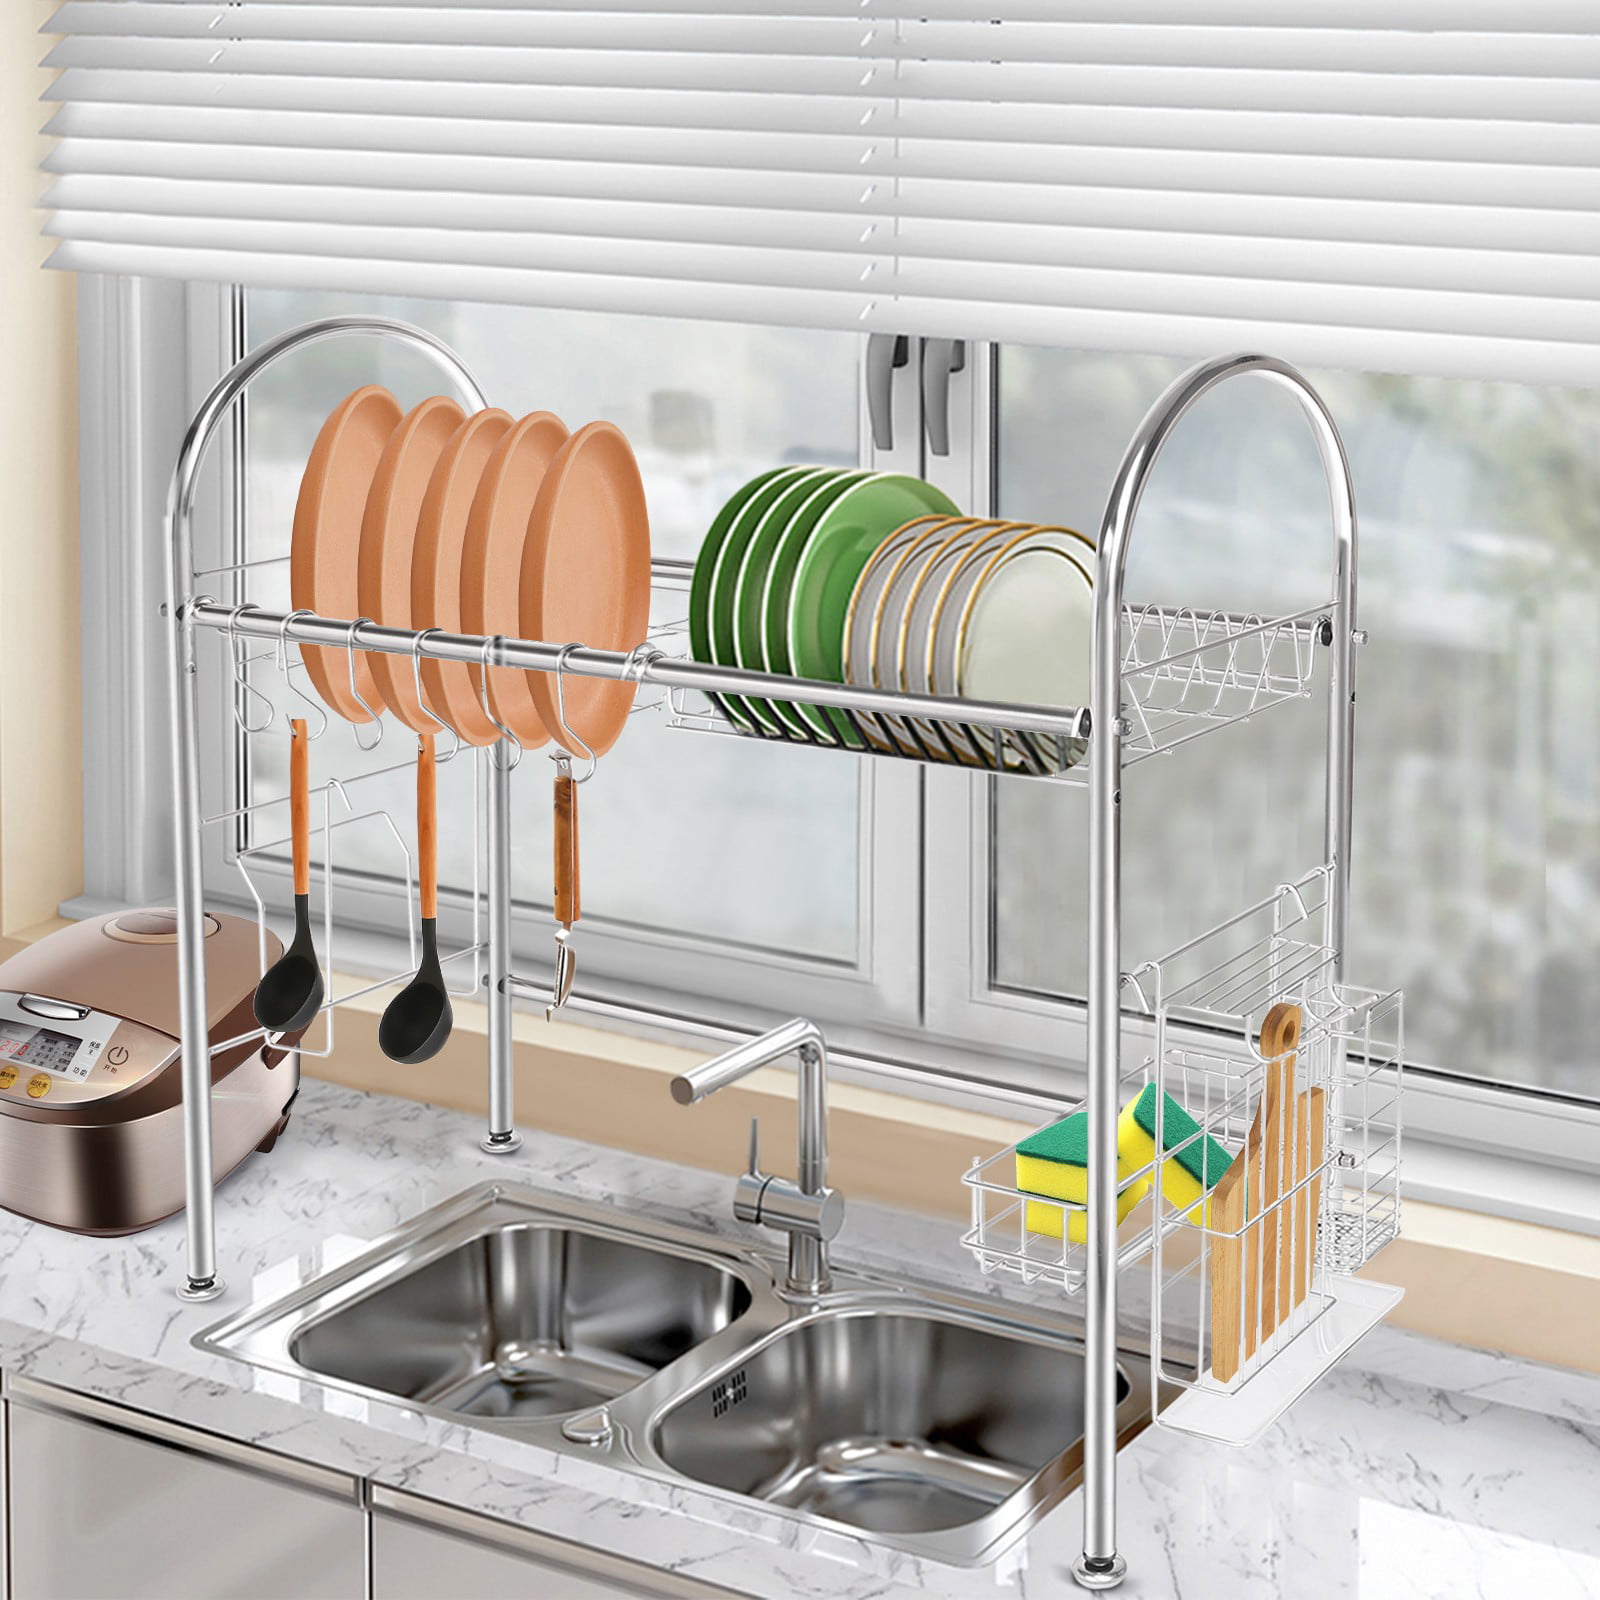 Details about   2 Tier Stainless Steel Dish Drying Rack Over Sink Kitchen Cutlery Drainer Holder 